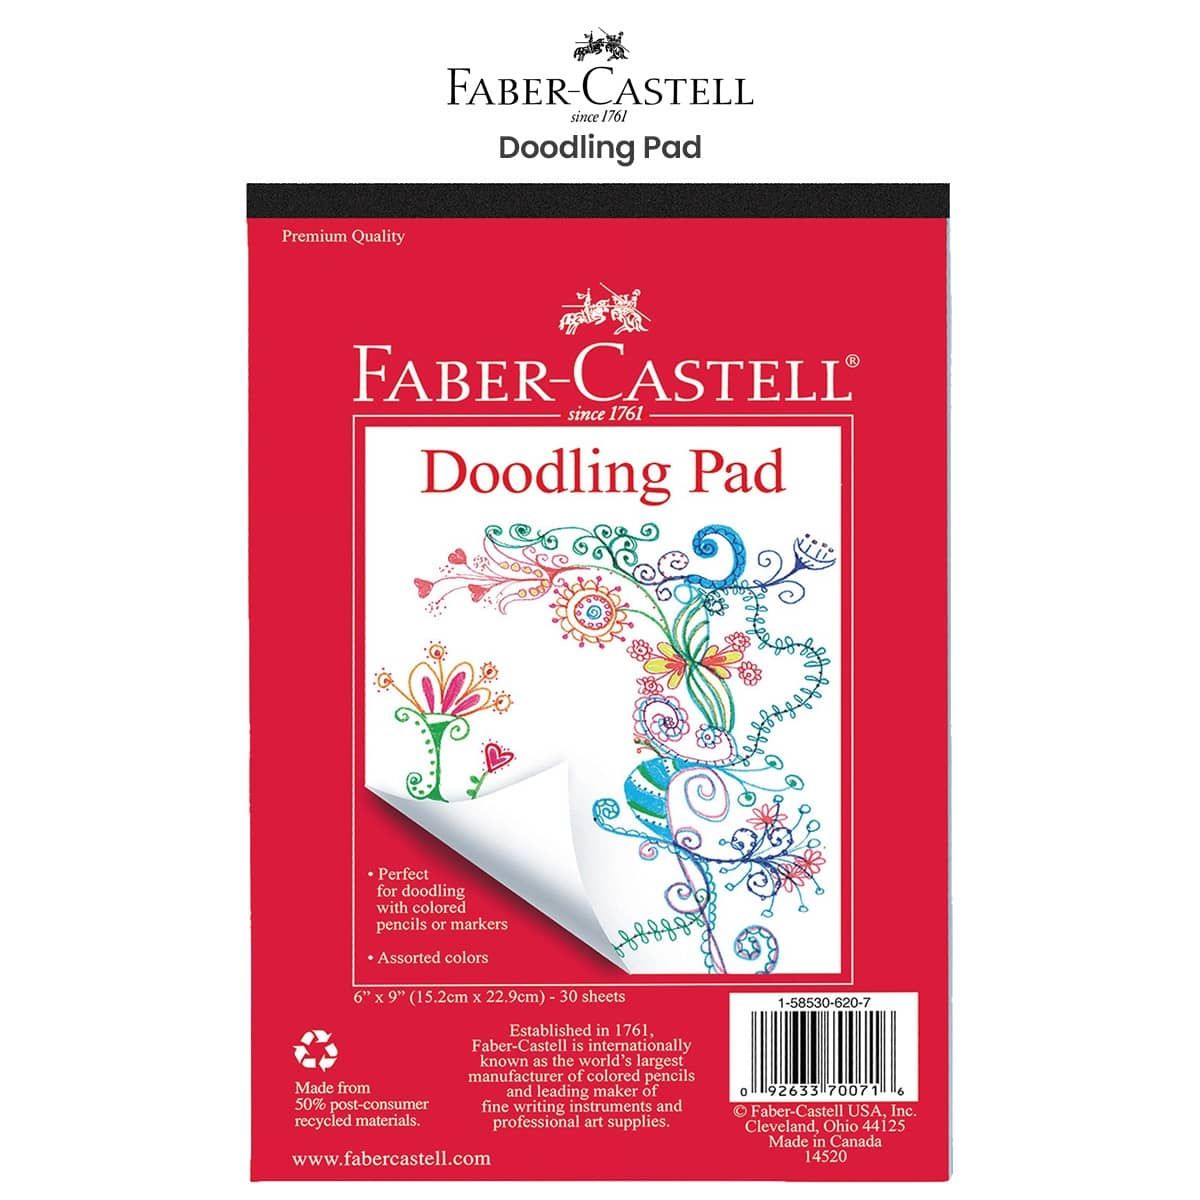 Faber-Castell Doodling Pad